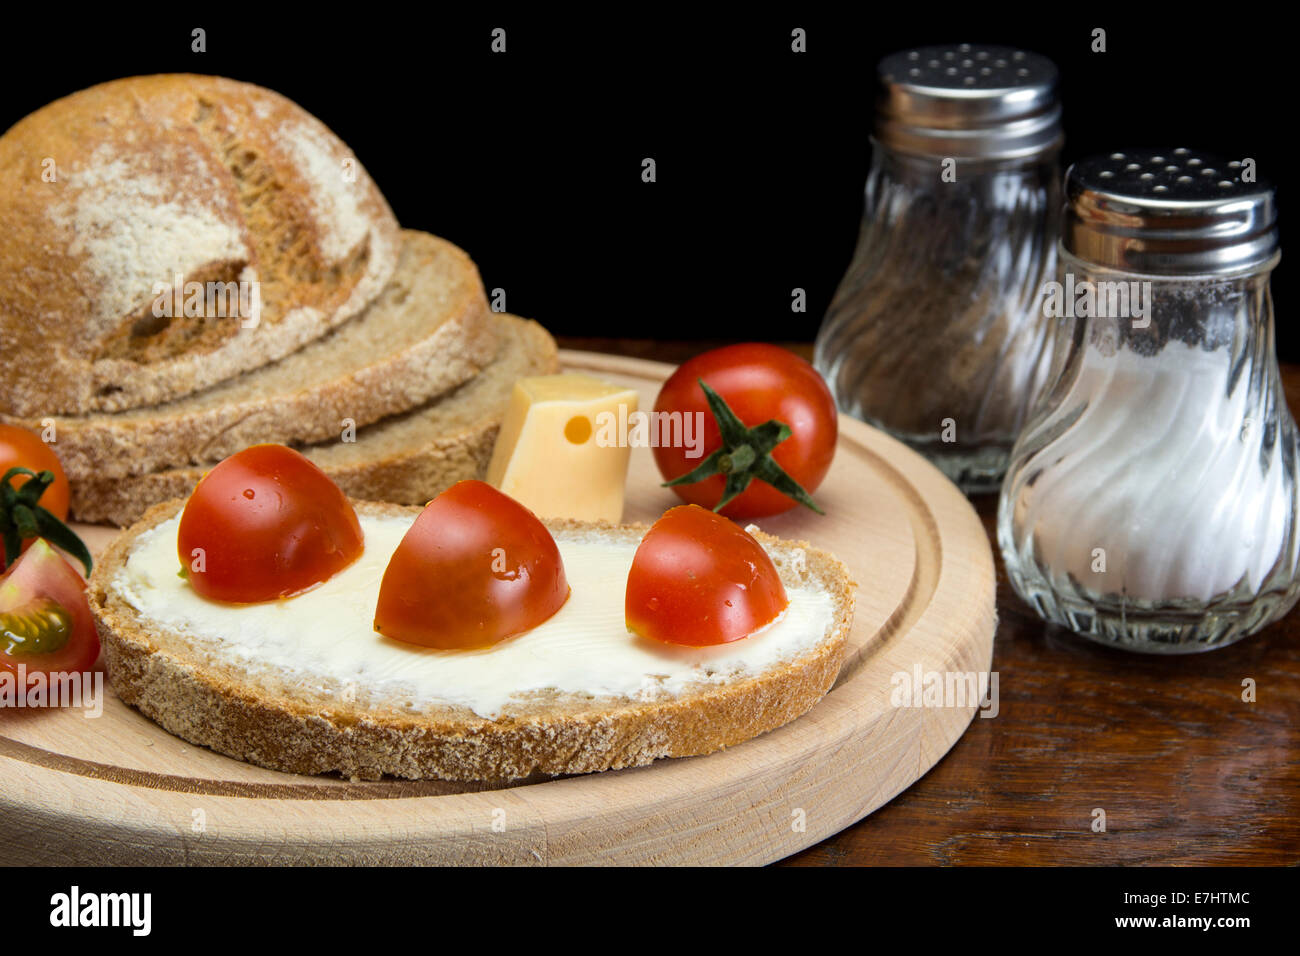 Close up image of spreading cream cheese on pumpernickel bread and splices tomato Stock Photo